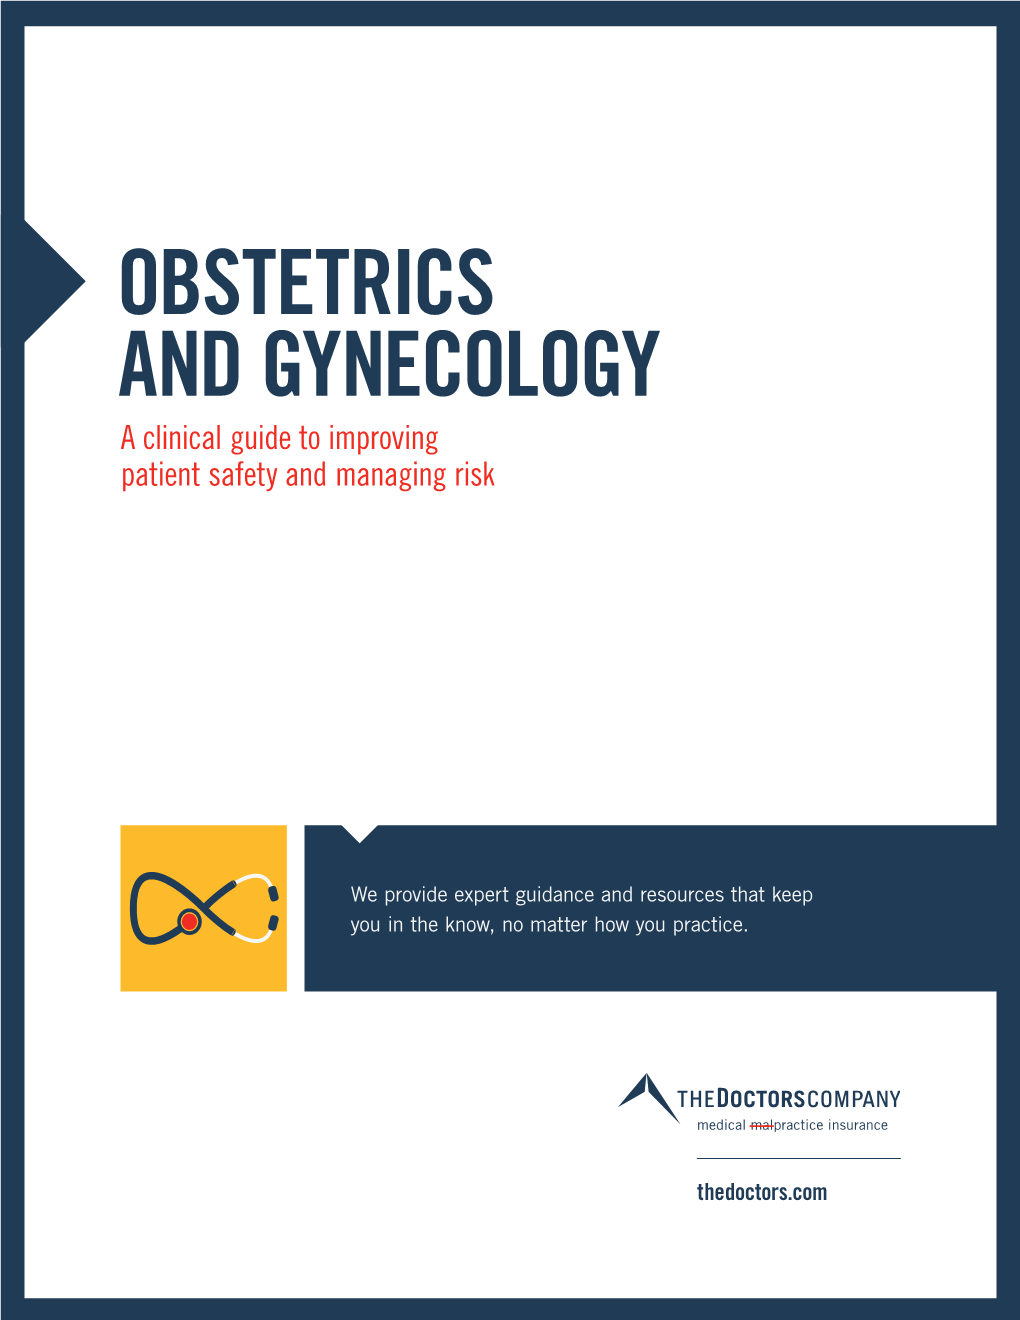 OBSTETRICS and GYNECOLOGY a Clinical Guide to Improving Patient Safety and Managing Risk